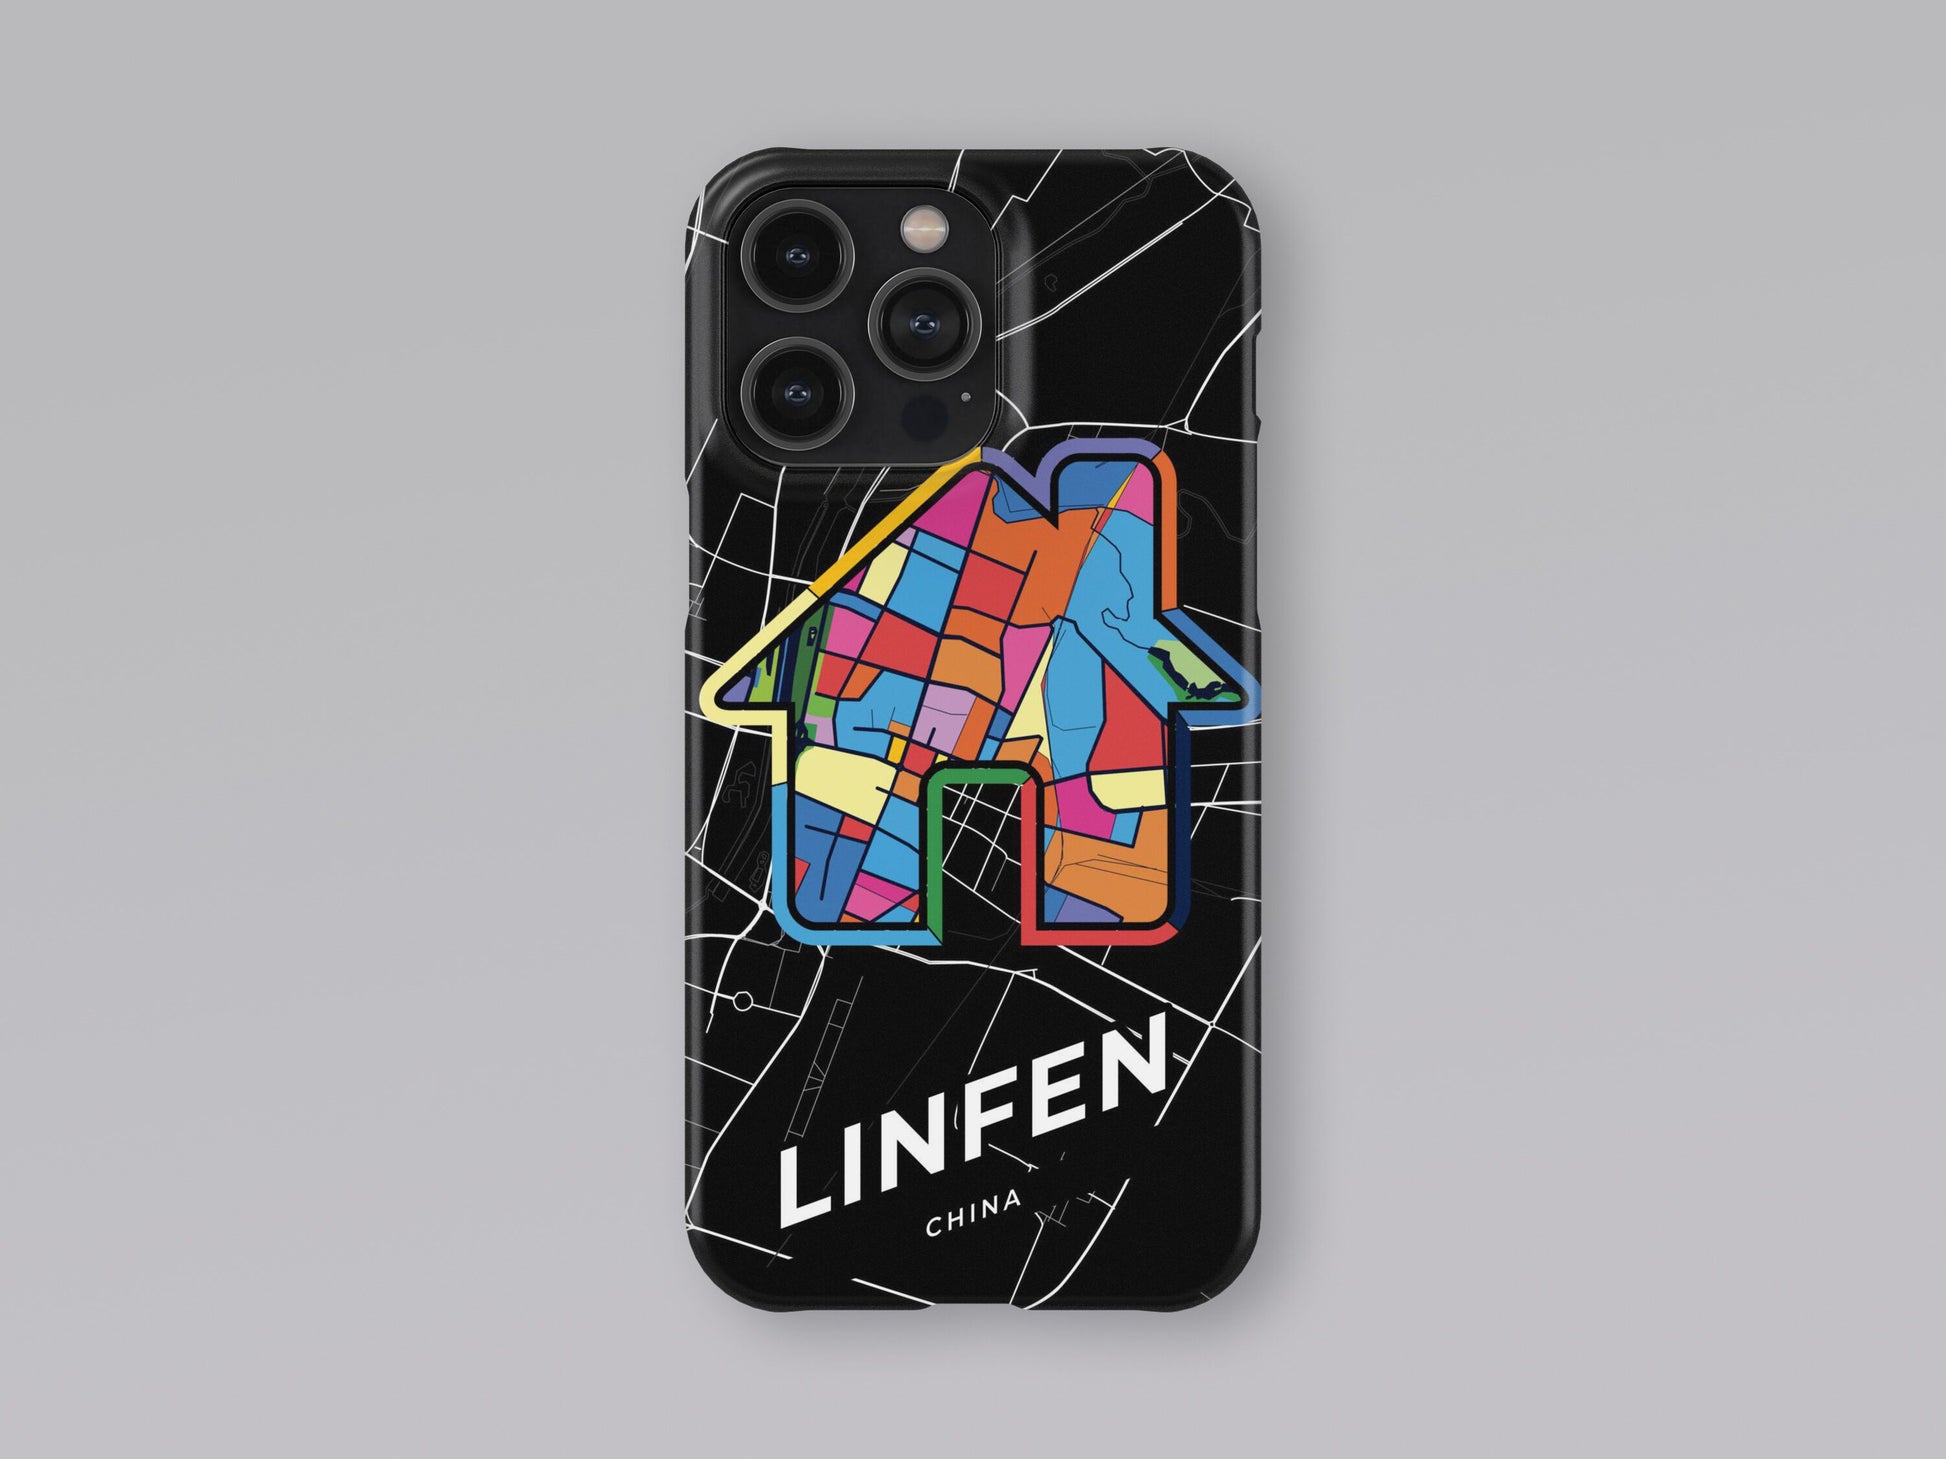 Linfen China slim phone case with colorful icon. Birthday, wedding or housewarming gift. Couple match cases. 3